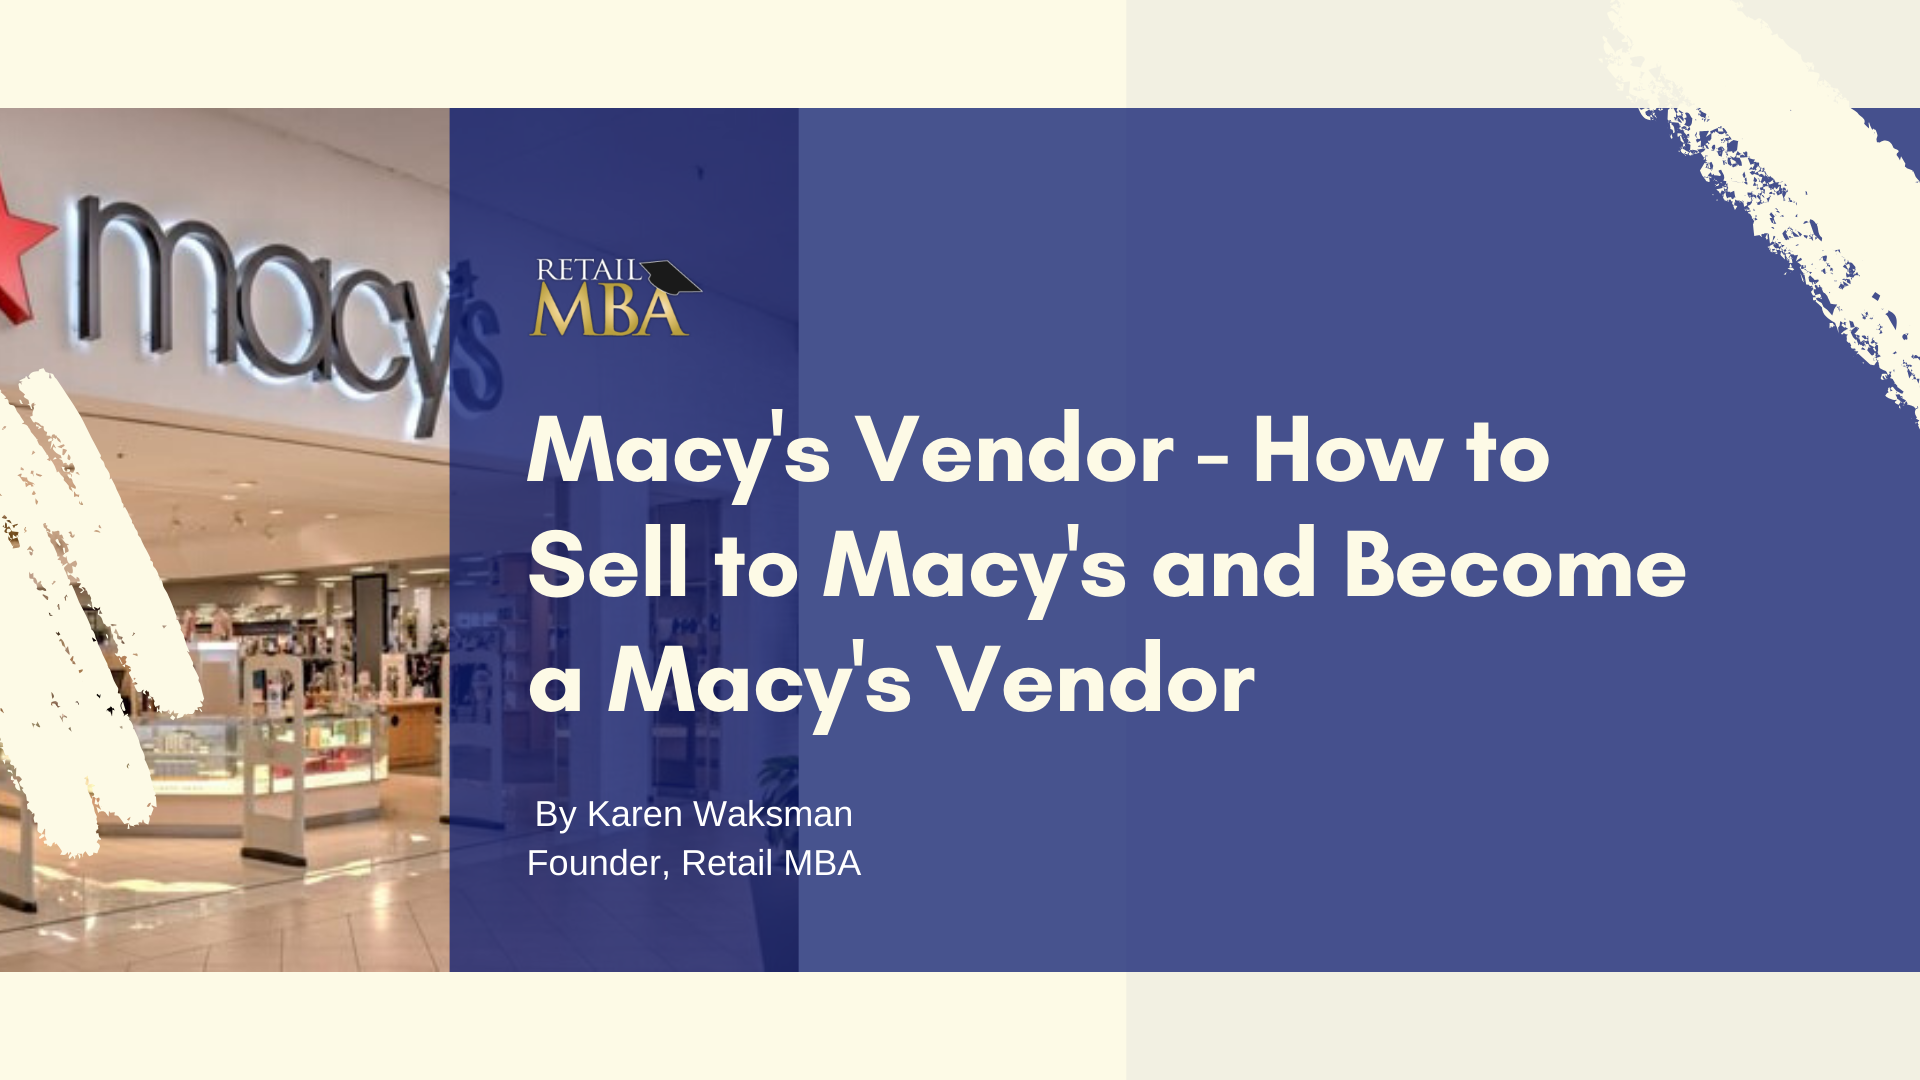 Macy's Vendor- How to Sell to Macy's